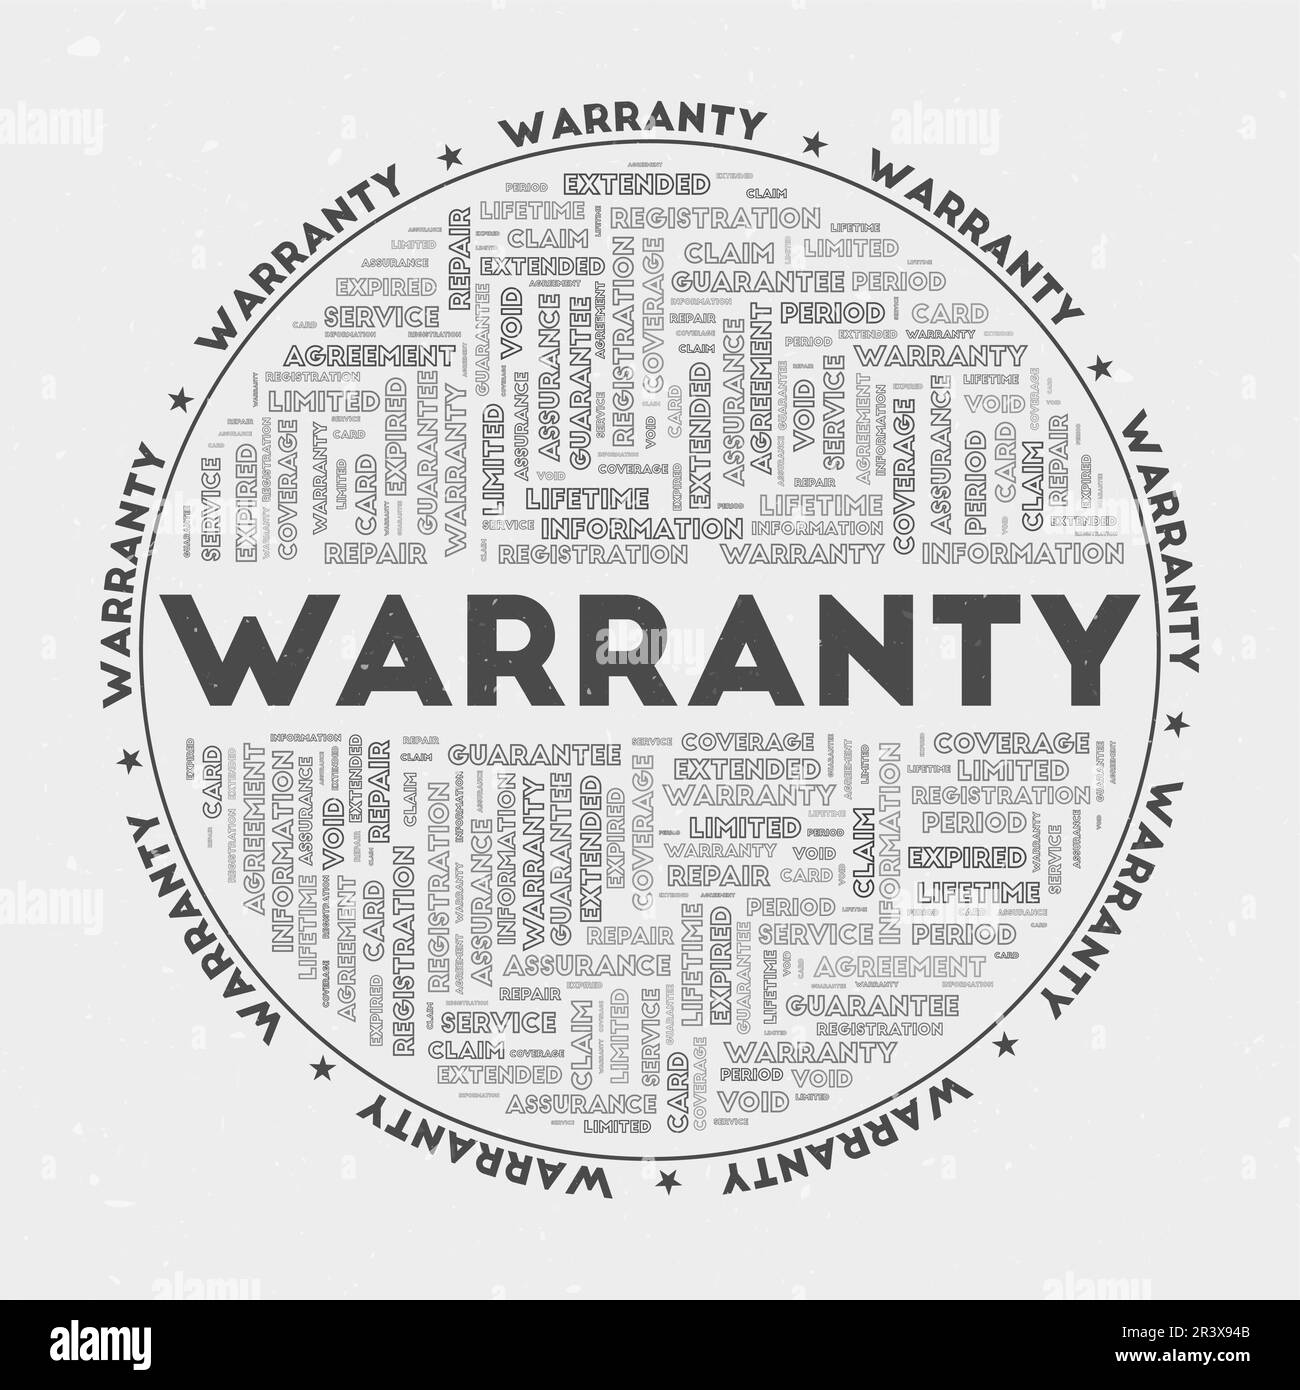 Warranty - round badge. Text warranty with keywords word clouds and circular text. Shady Character color theme and grunge texture. Awesome vector illu Stock Vector